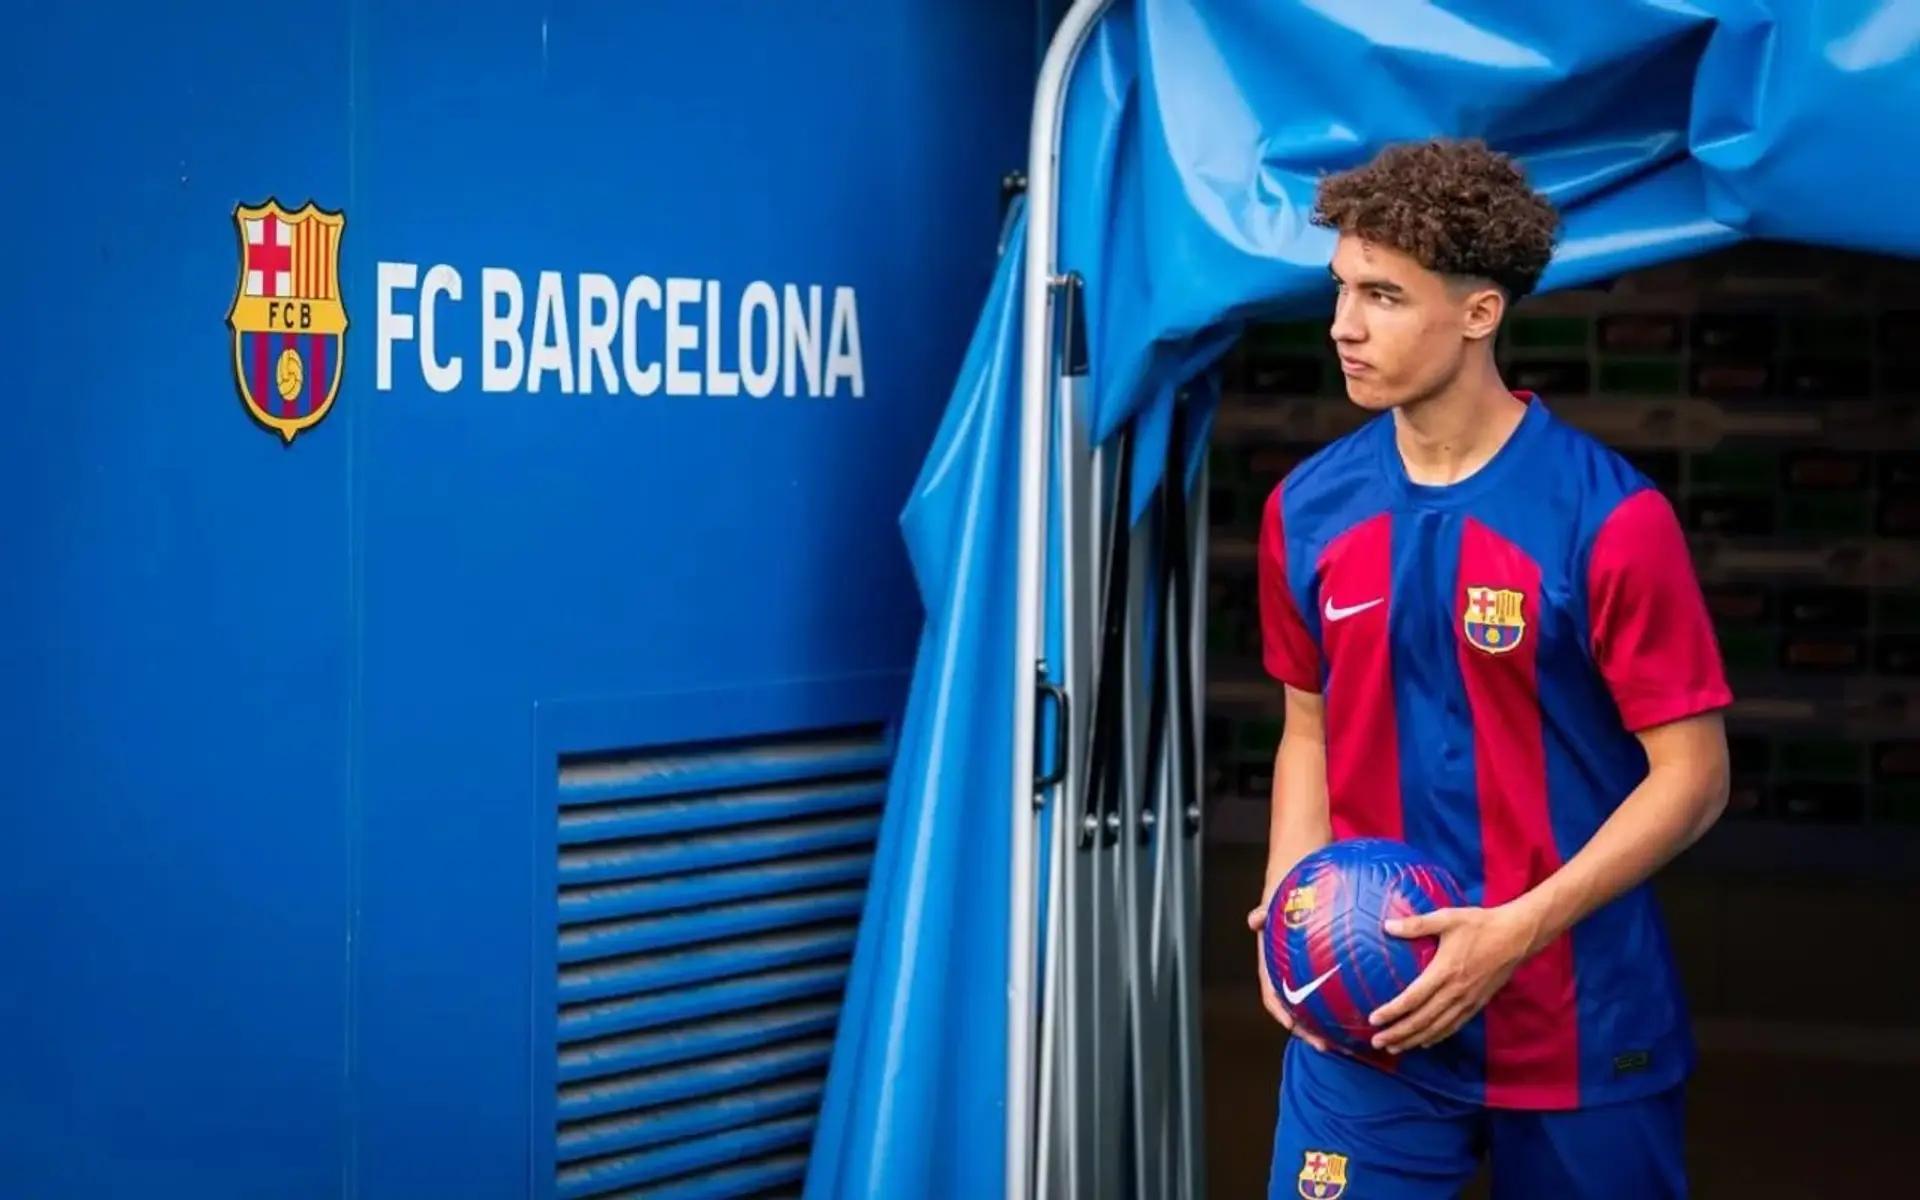 release wonderkid, sign clause set €1,000,000,000 Football German Barcelona - at